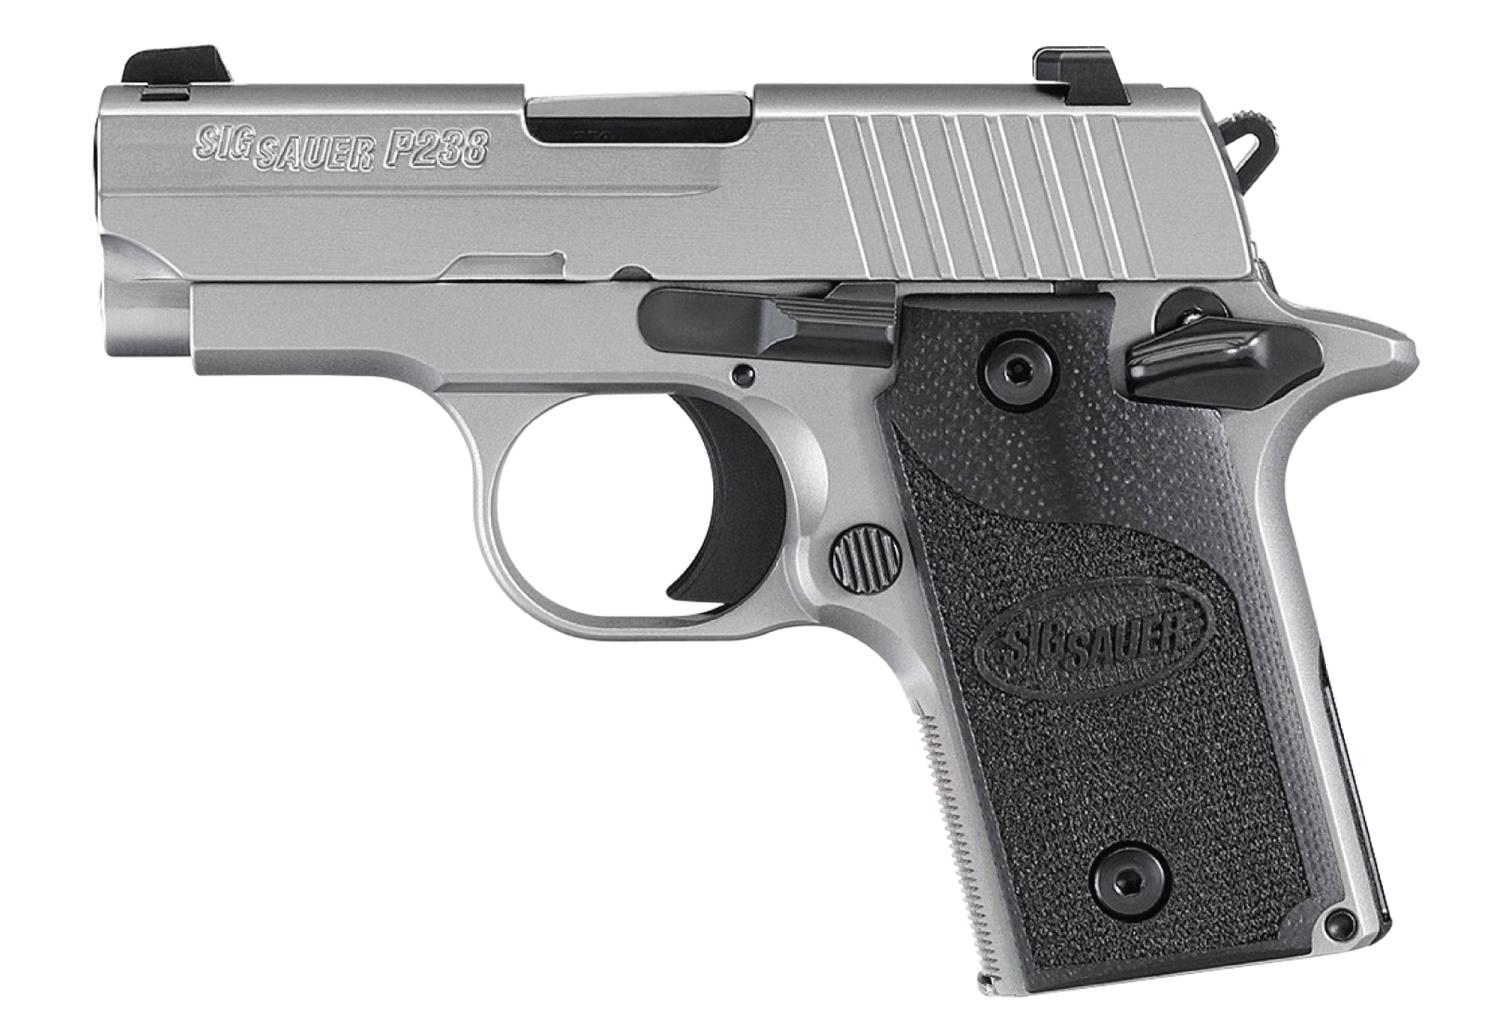  P238 Hd 380acp 2.7in W/Night Sights - Stainless Steel